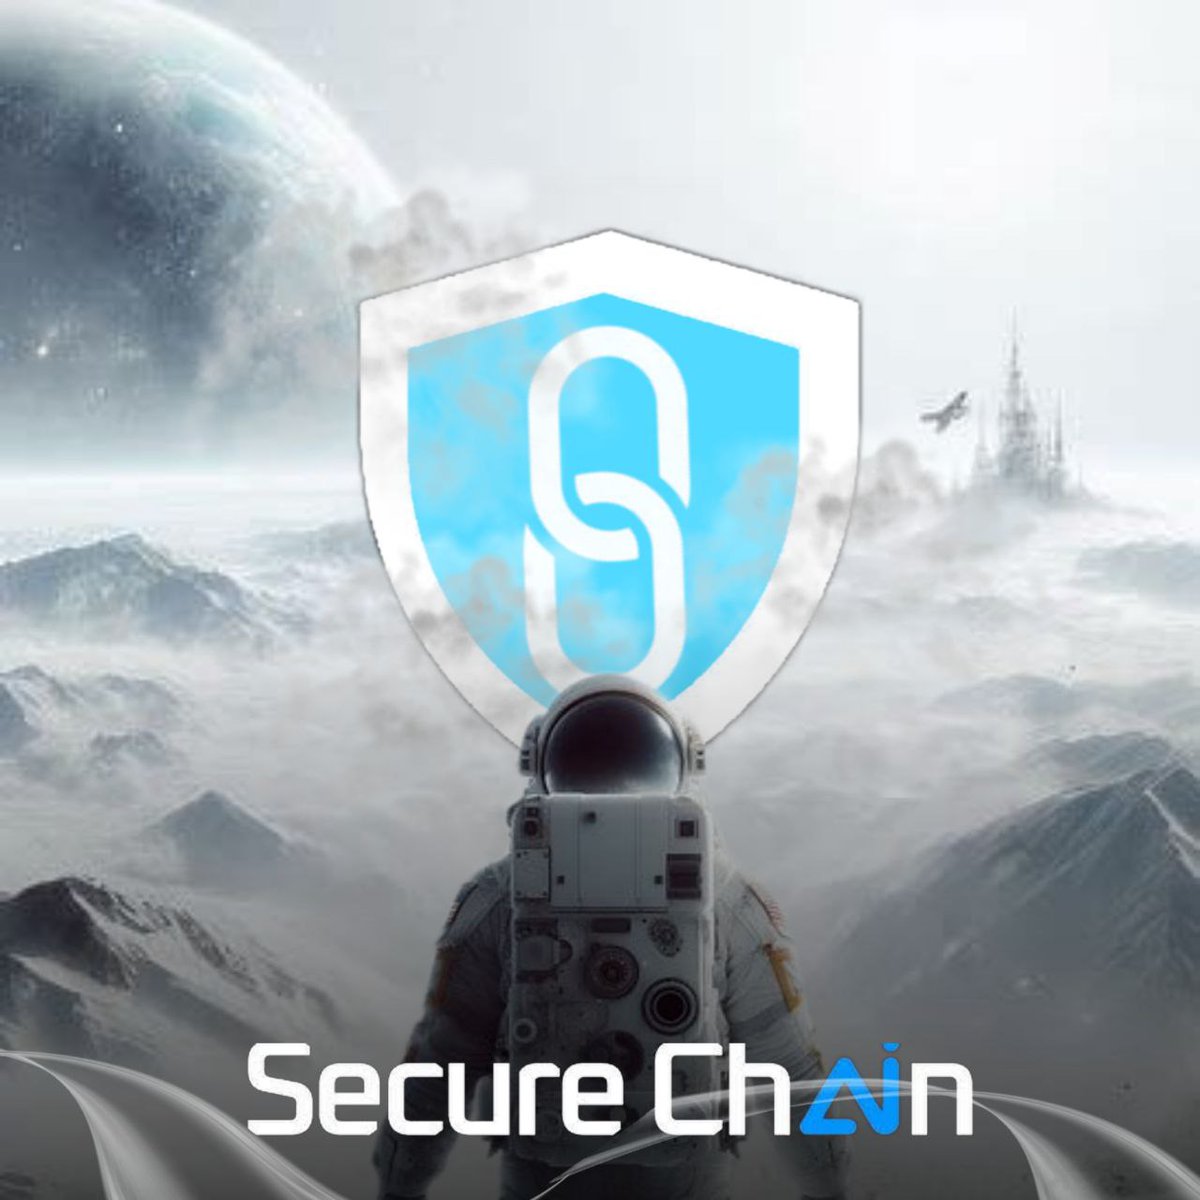 Here's is the bullish season, you don't have to stress to earn BIG. Lock your $SCAI tokens with @SecurechainAI and let them do the work for you.
With a market cap of less than a million. Get it from LATOKEN and $SCAI.exchange.
@securechainai
#scai
#ai 
#Web3 
#scaidoge